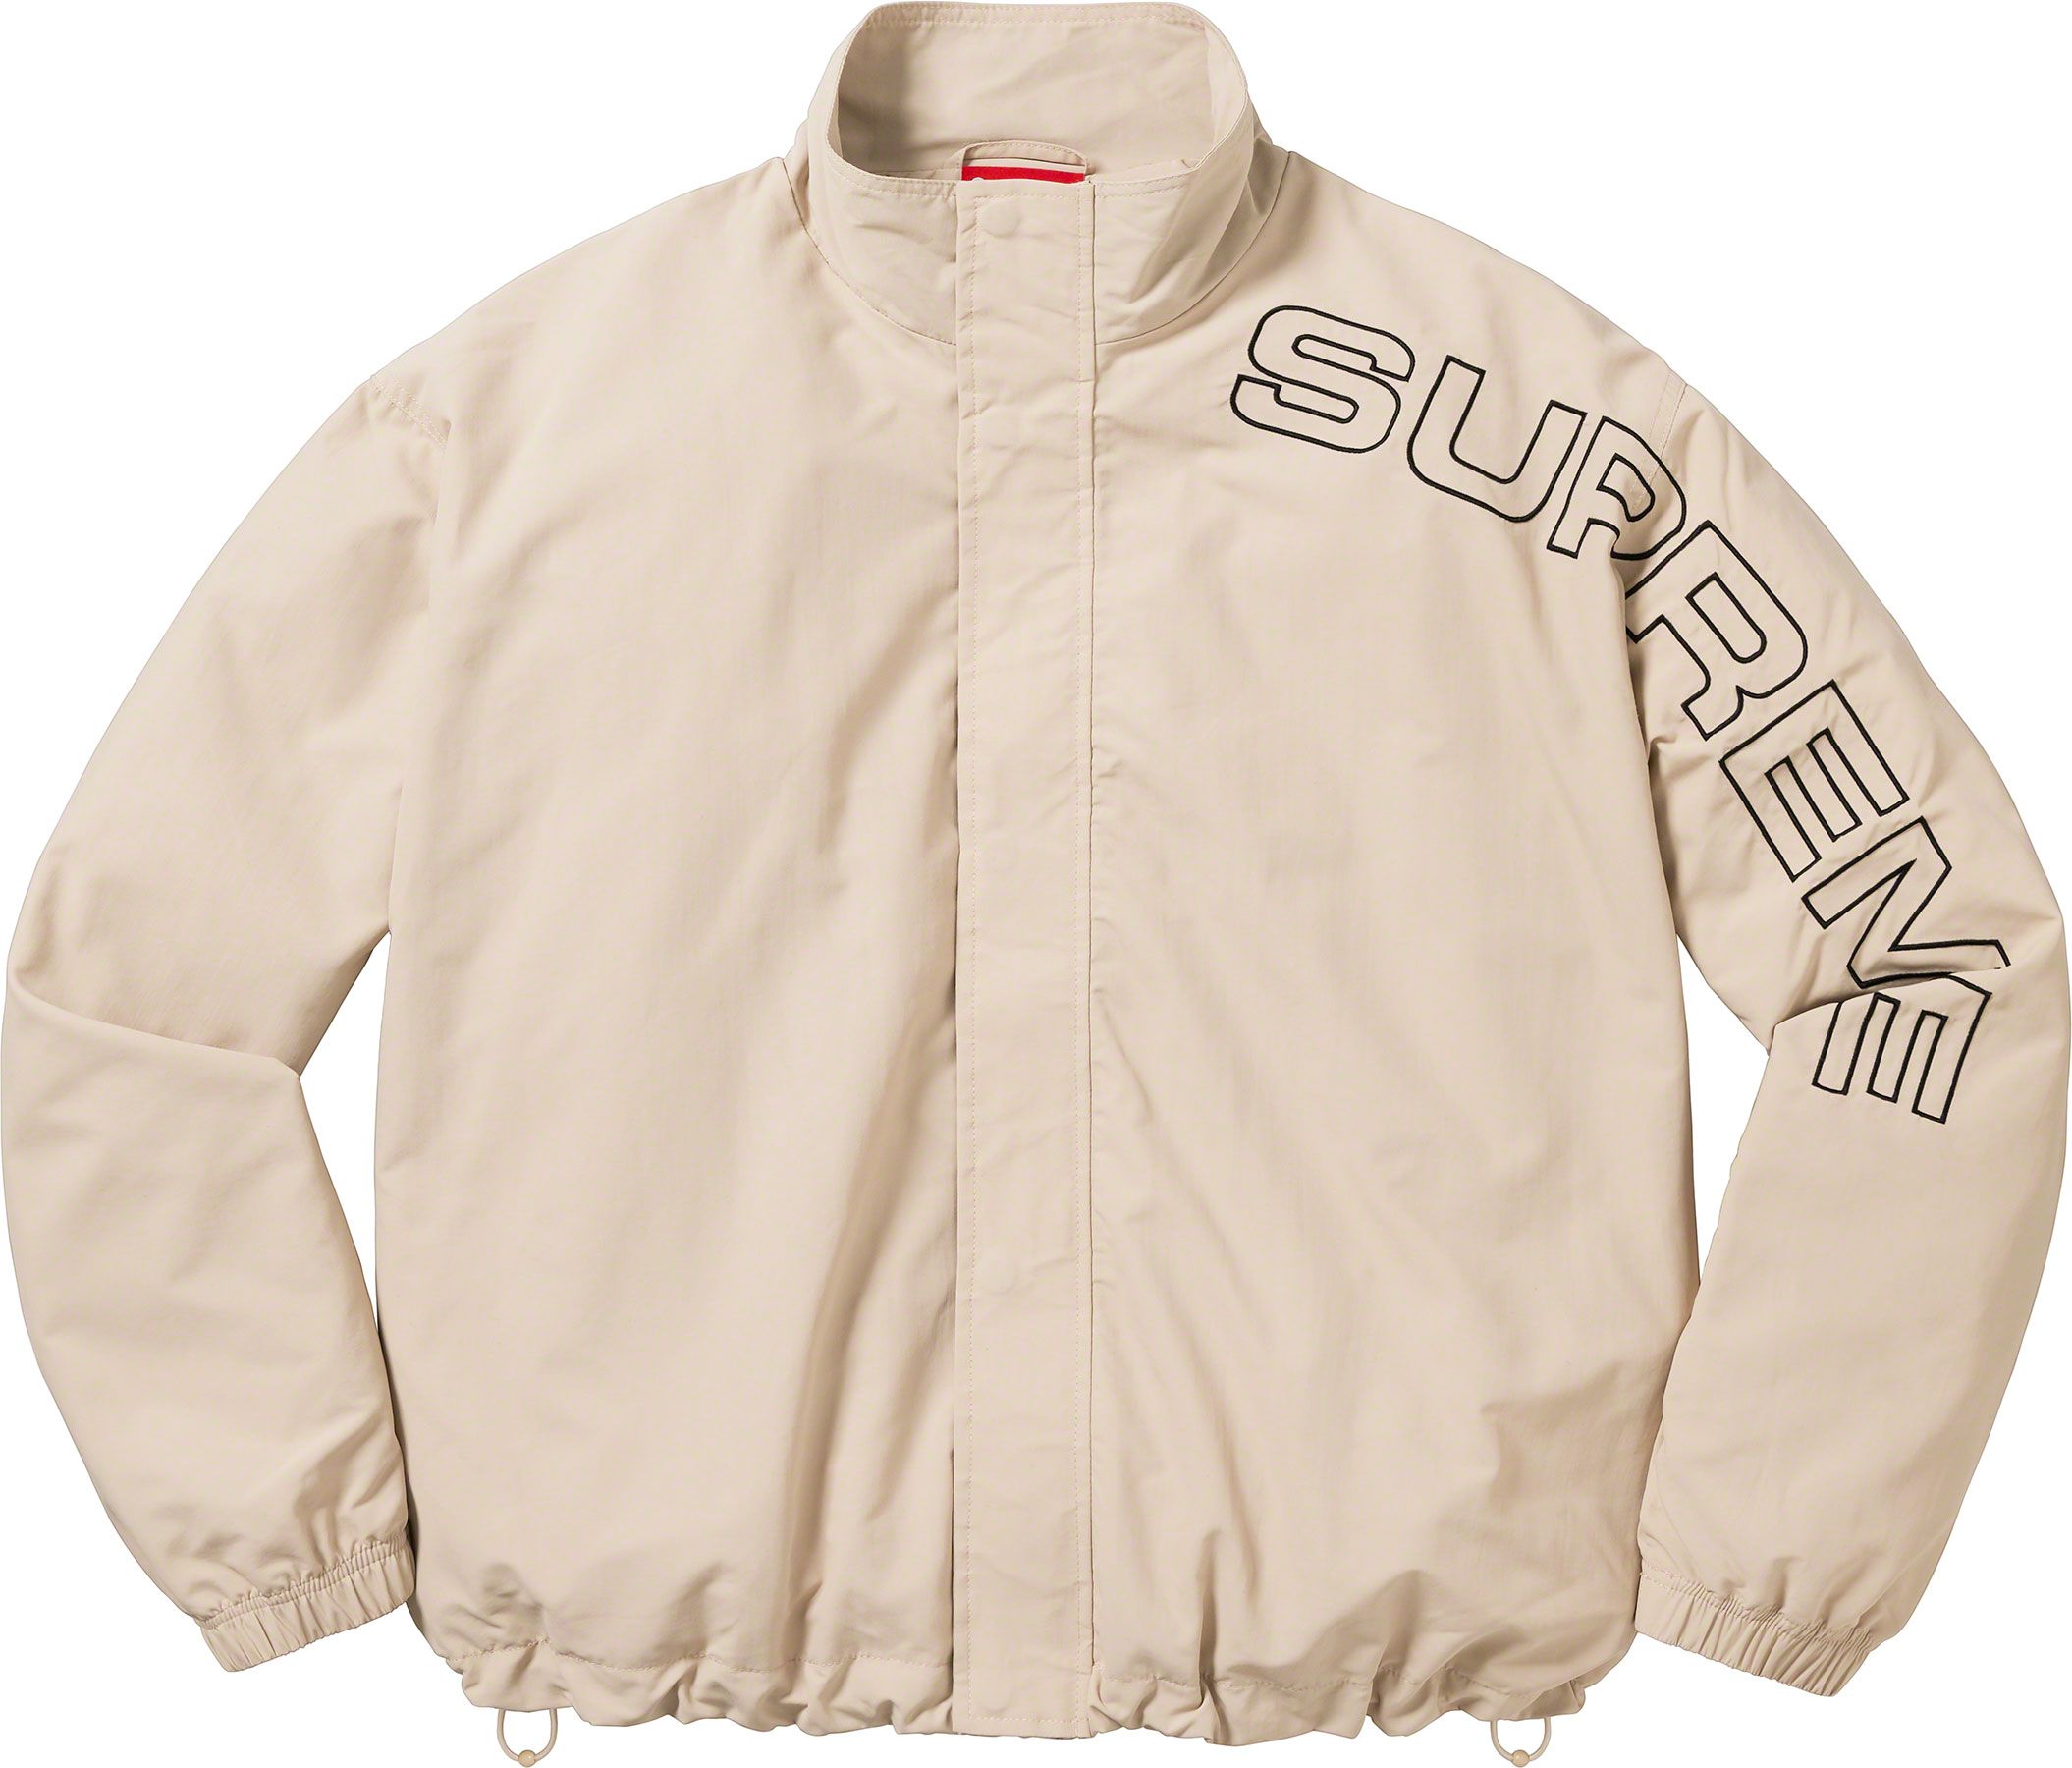 Spellout Embroidered Track Jacket - Supreme